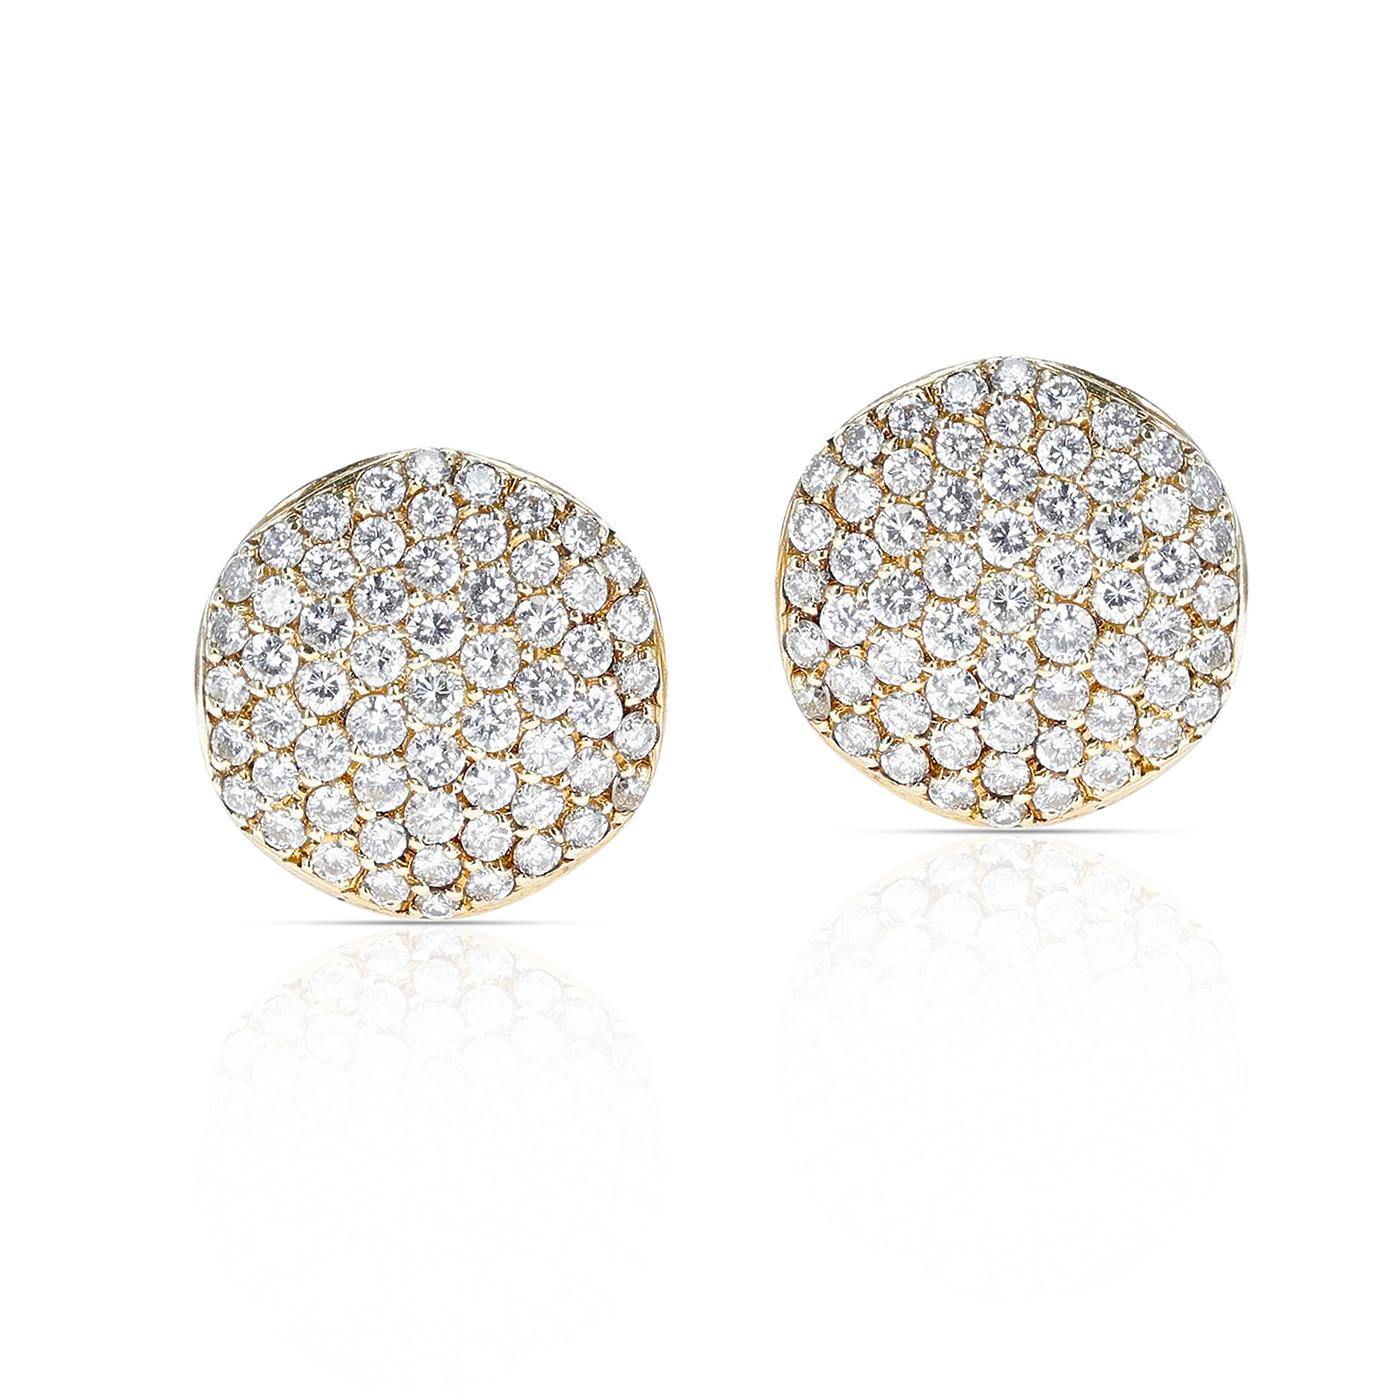 Round Circular 4.50 carat Diamond Earrings, 14K Yellow Gold In Excellent Condition For Sale In New York, NY